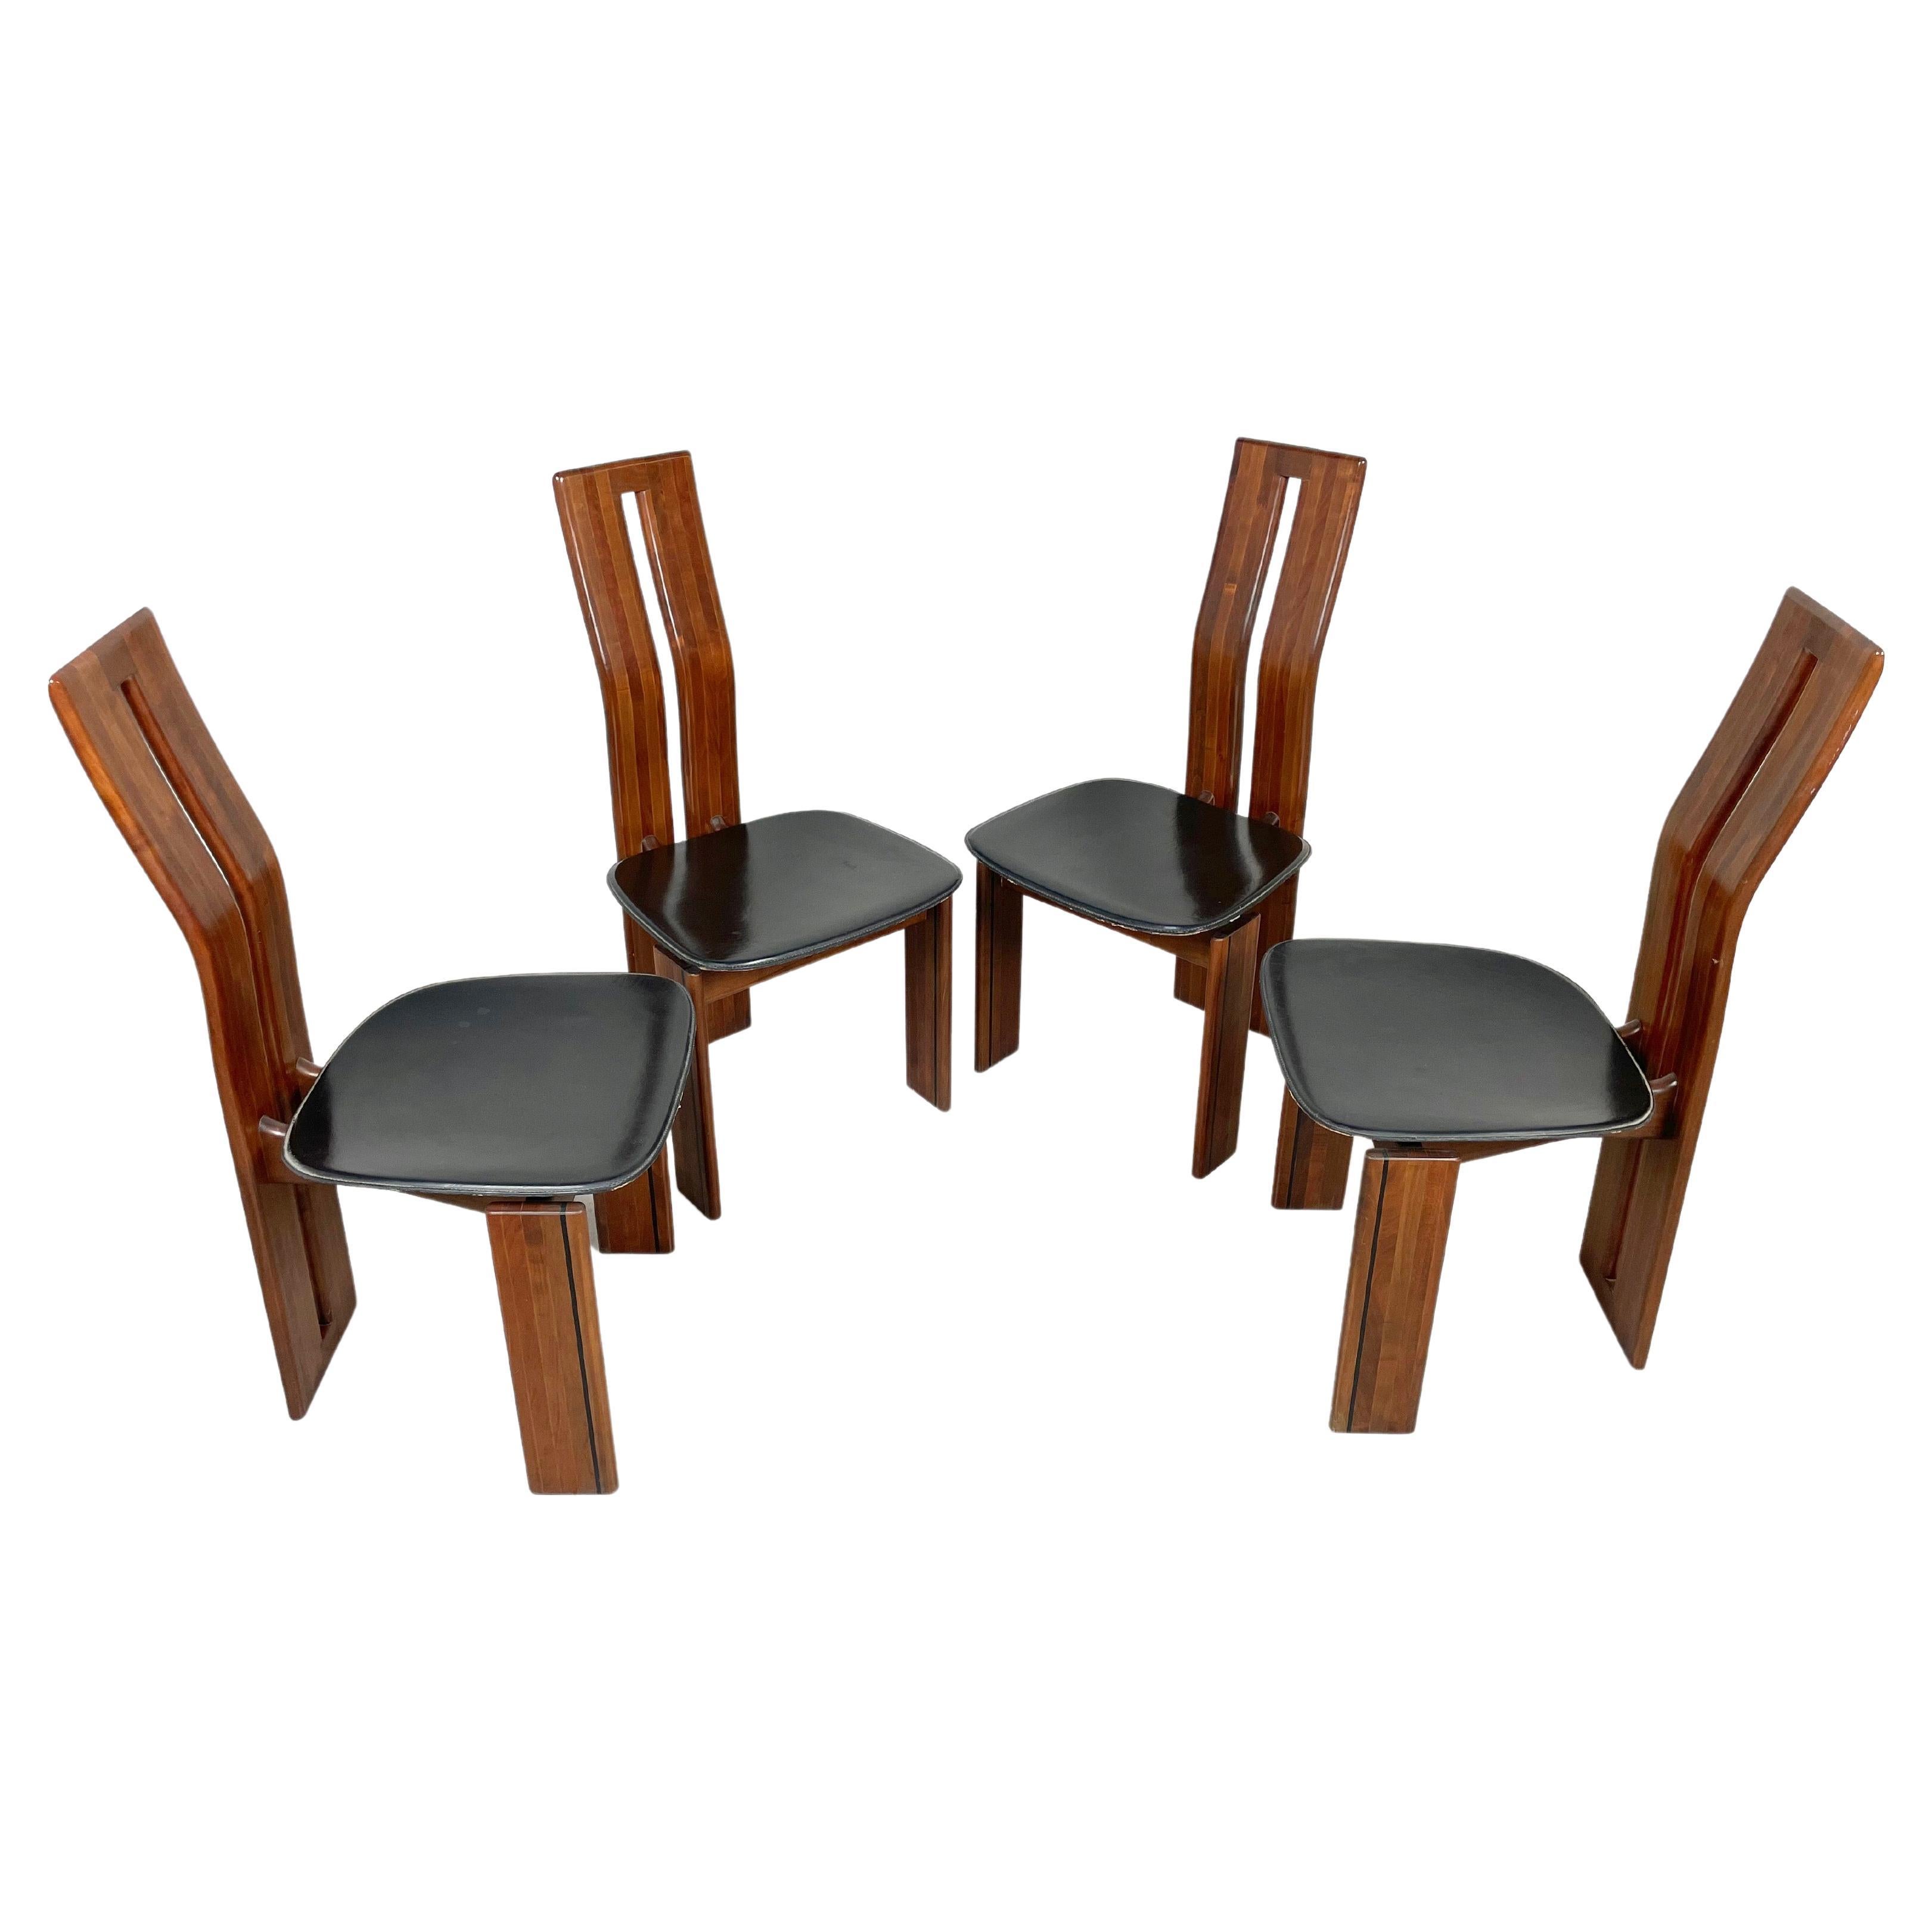 Set of Four Chairs Wood and Leather Mario Marenco for Mobil Girgi, Italy 1970s For Sale